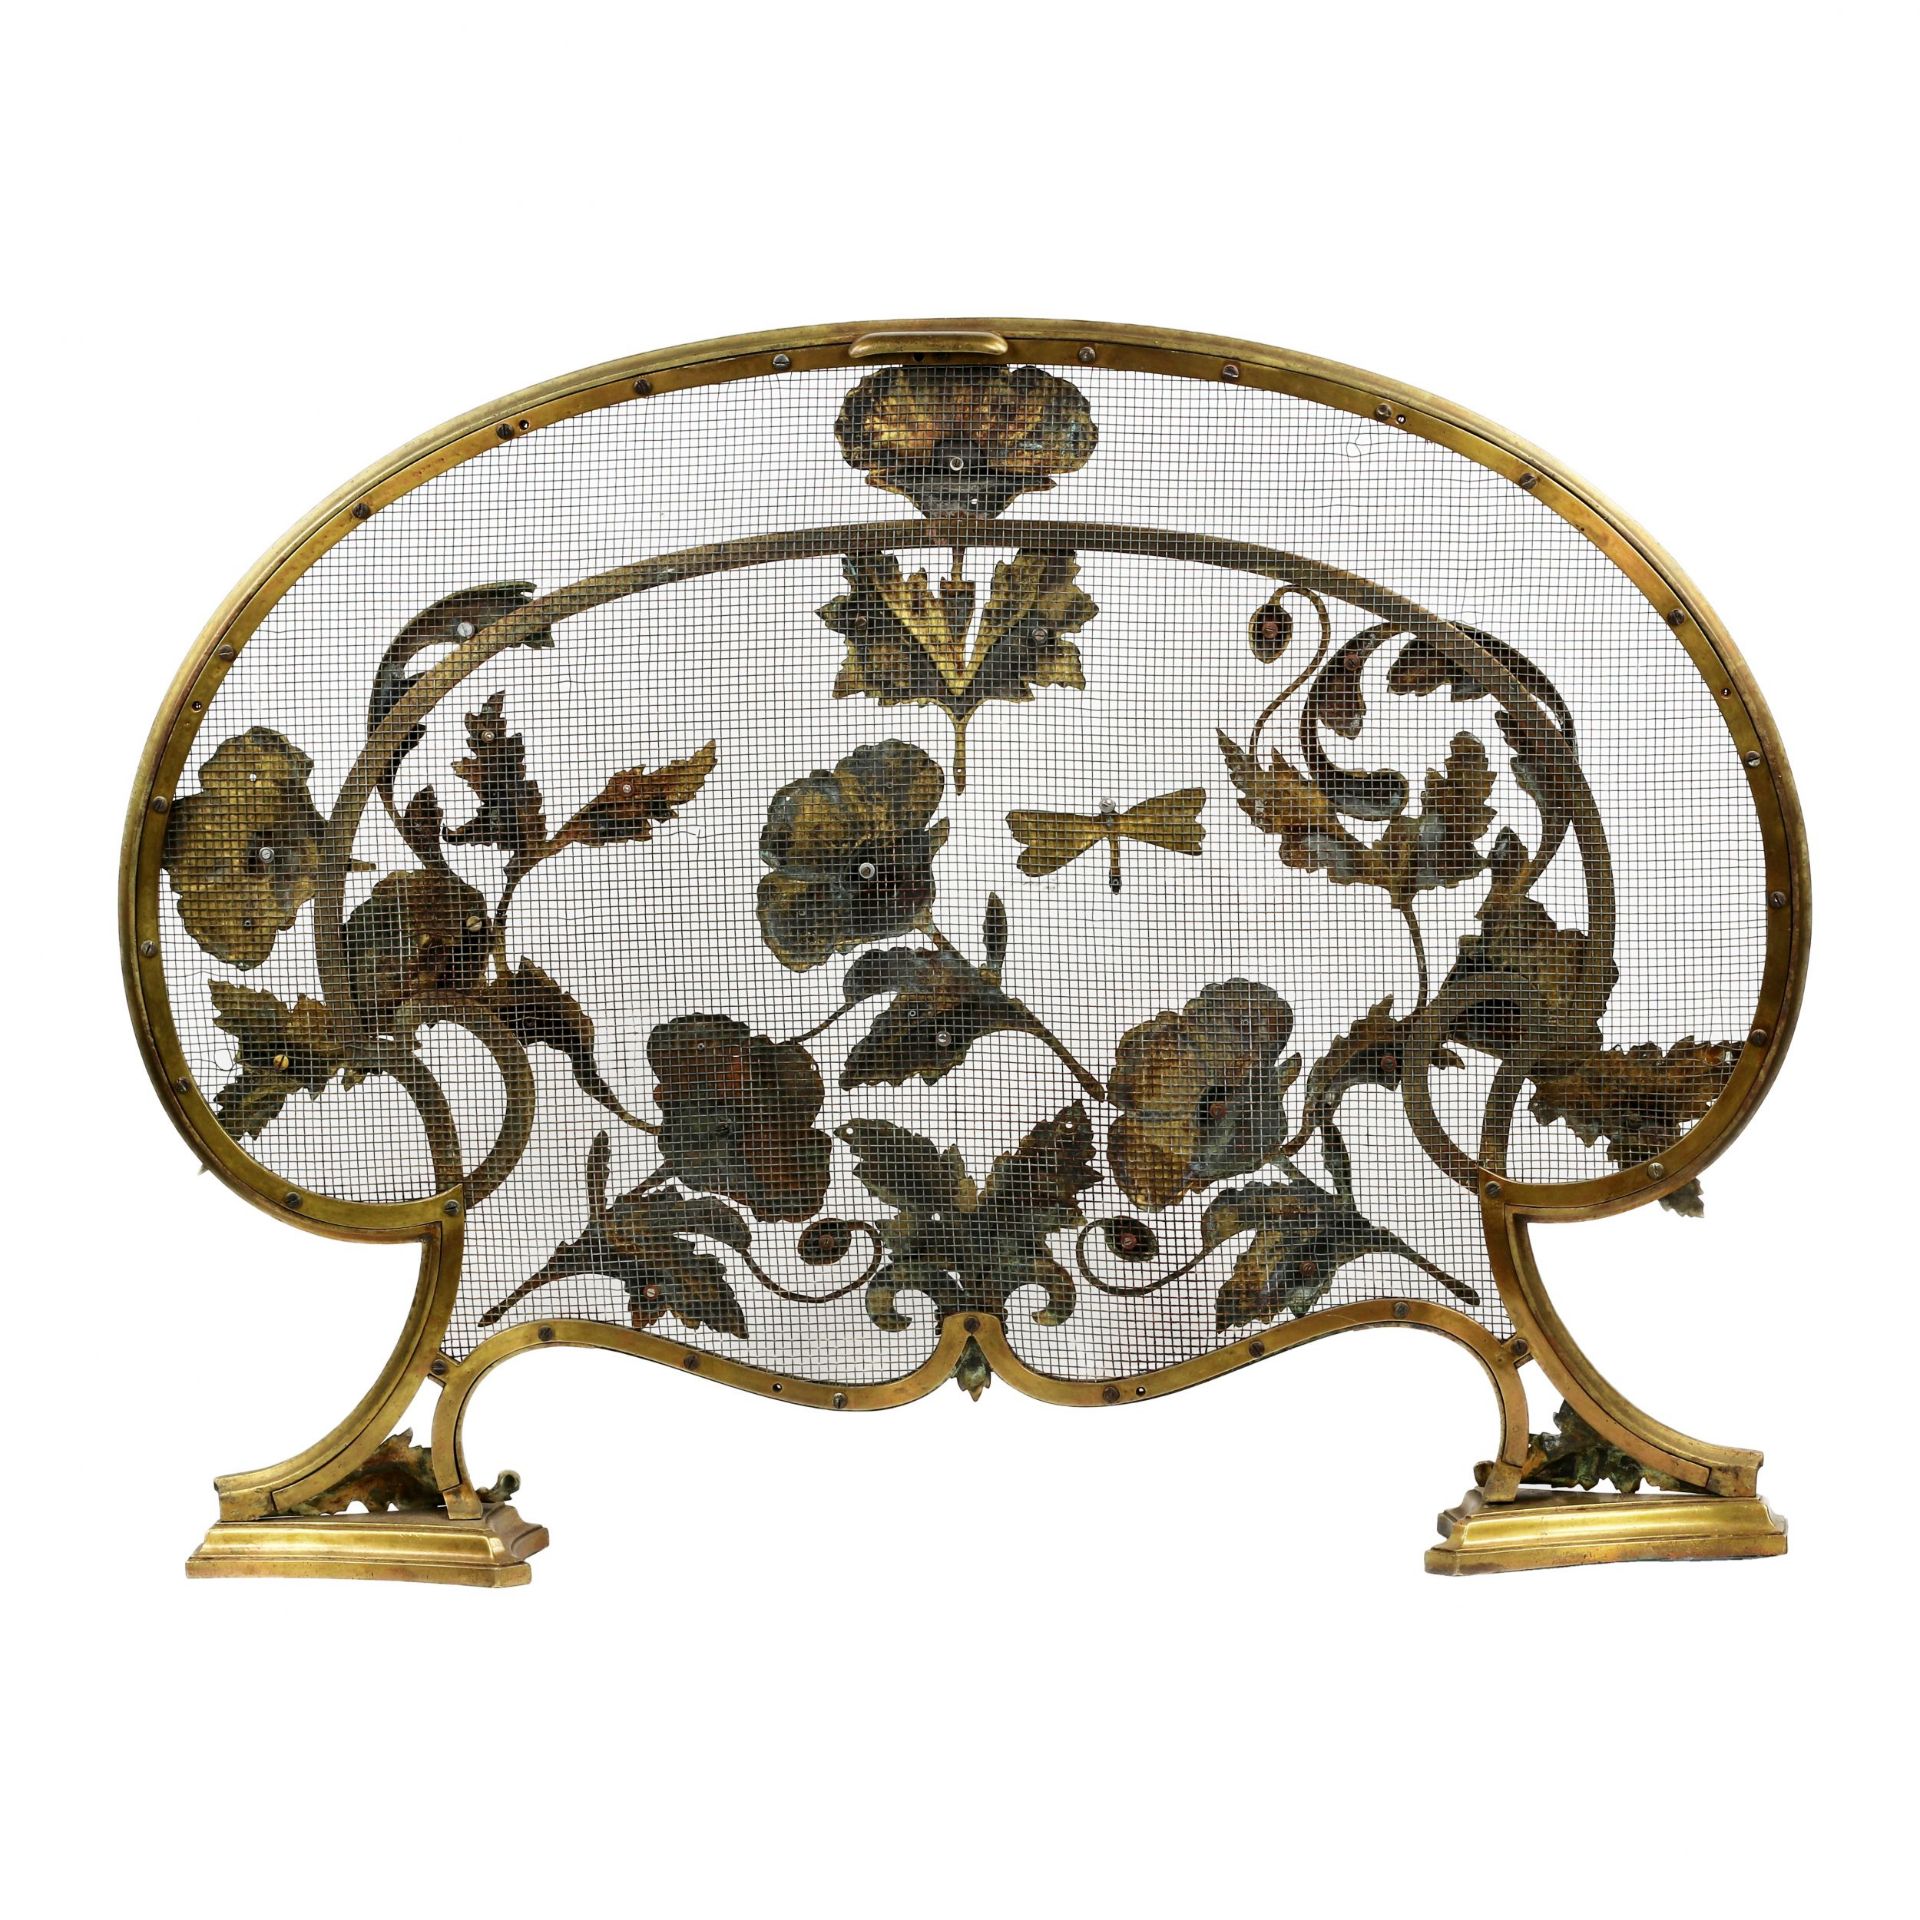 Elegant mantel screen in bronze, with poppies, in Art Nouveau style. France, around 1900 - Image 4 of 4